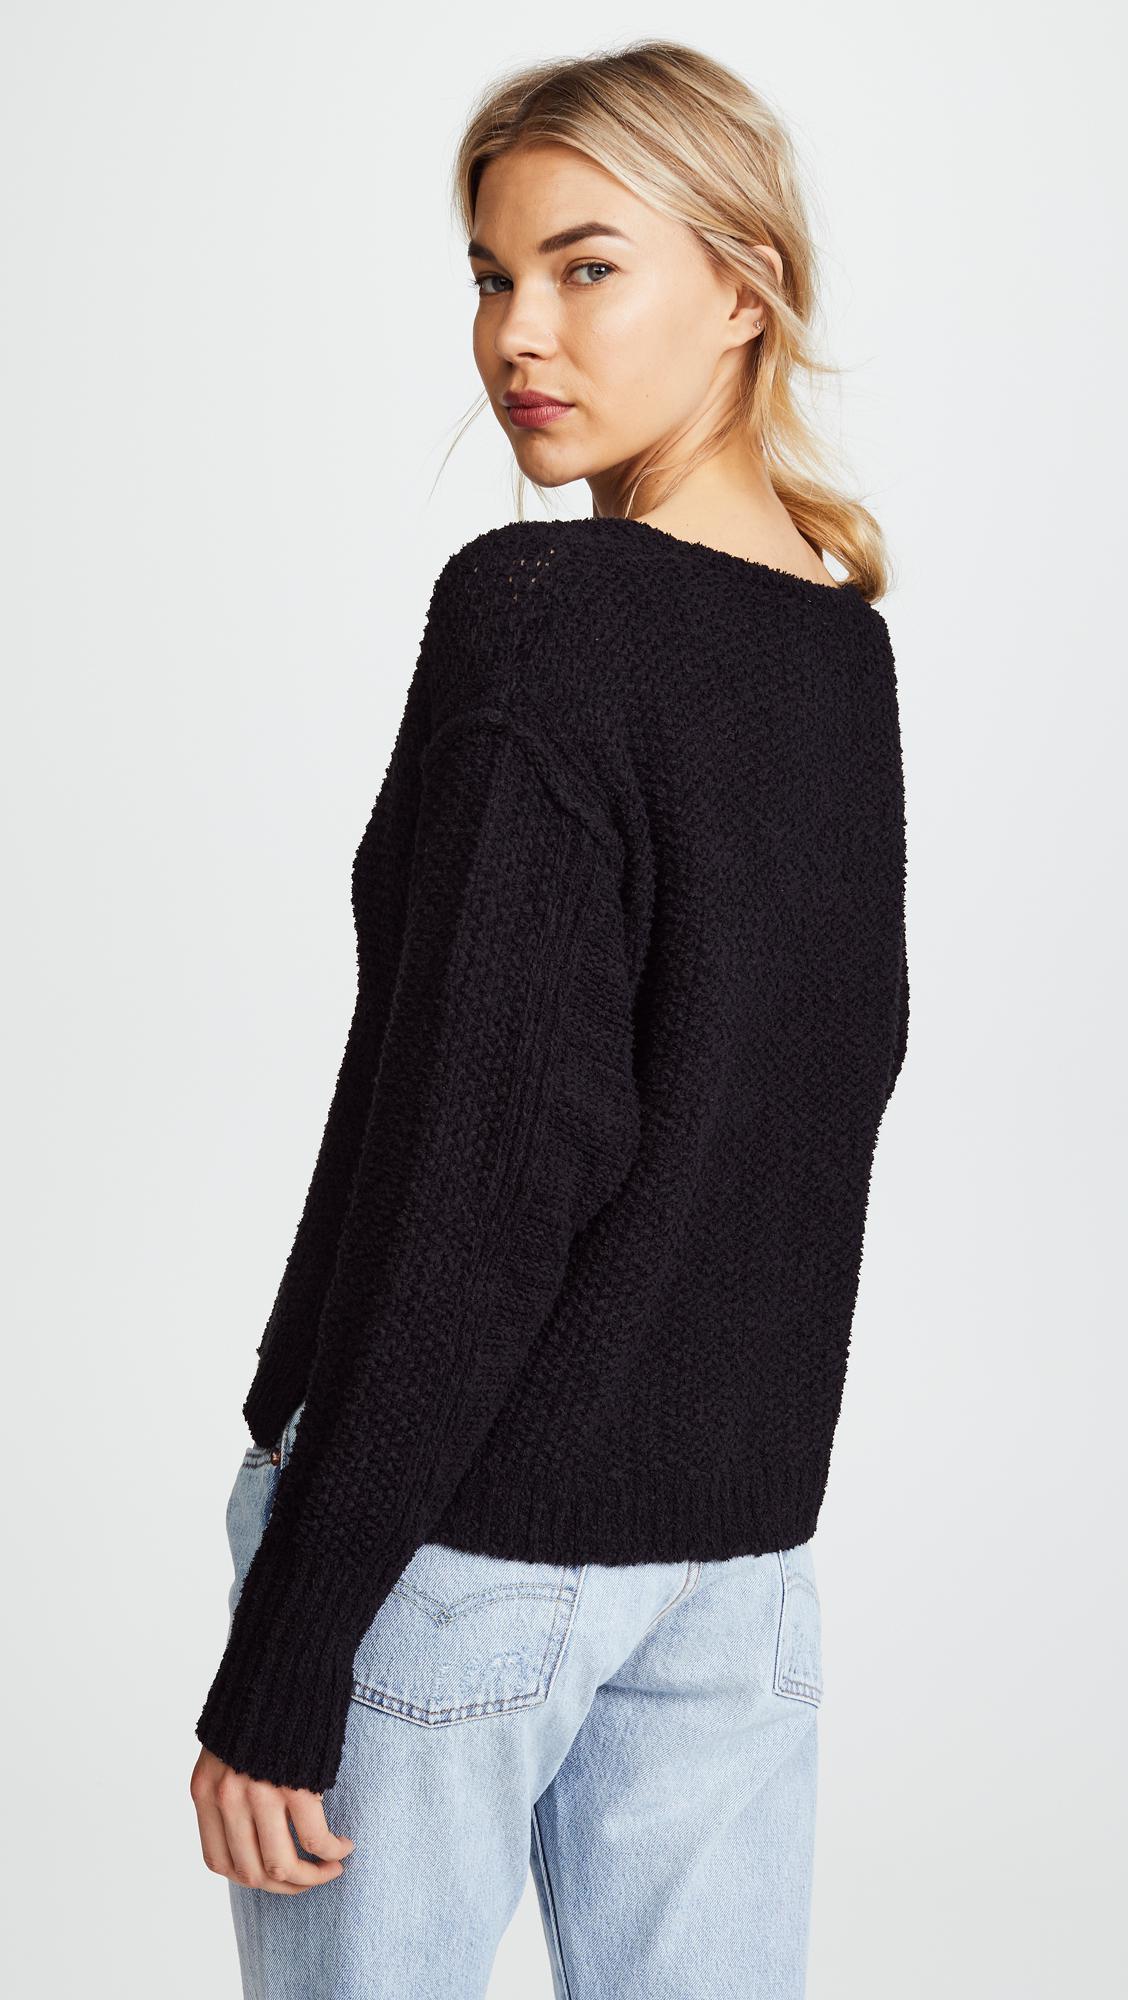 Free People Cotton Coco V Neck Sweater in Black - Lyst